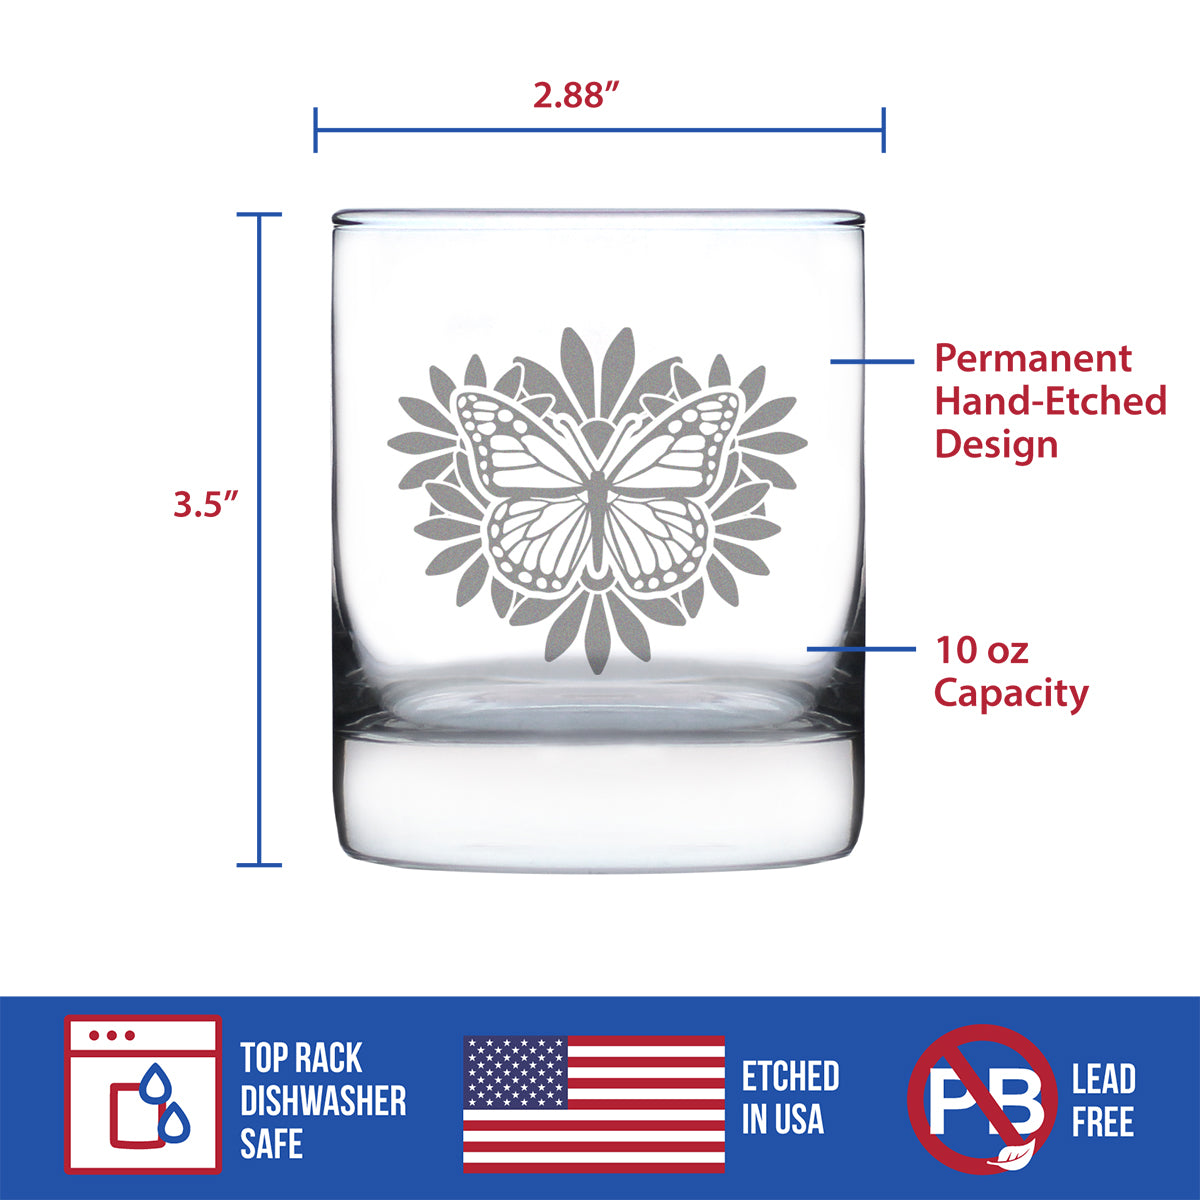 Monarch Butterfly Whiskey Rocks Glass - Floral Decor and Outdoorsy Gifts for Gardeners - 10.25 Oz Glasses